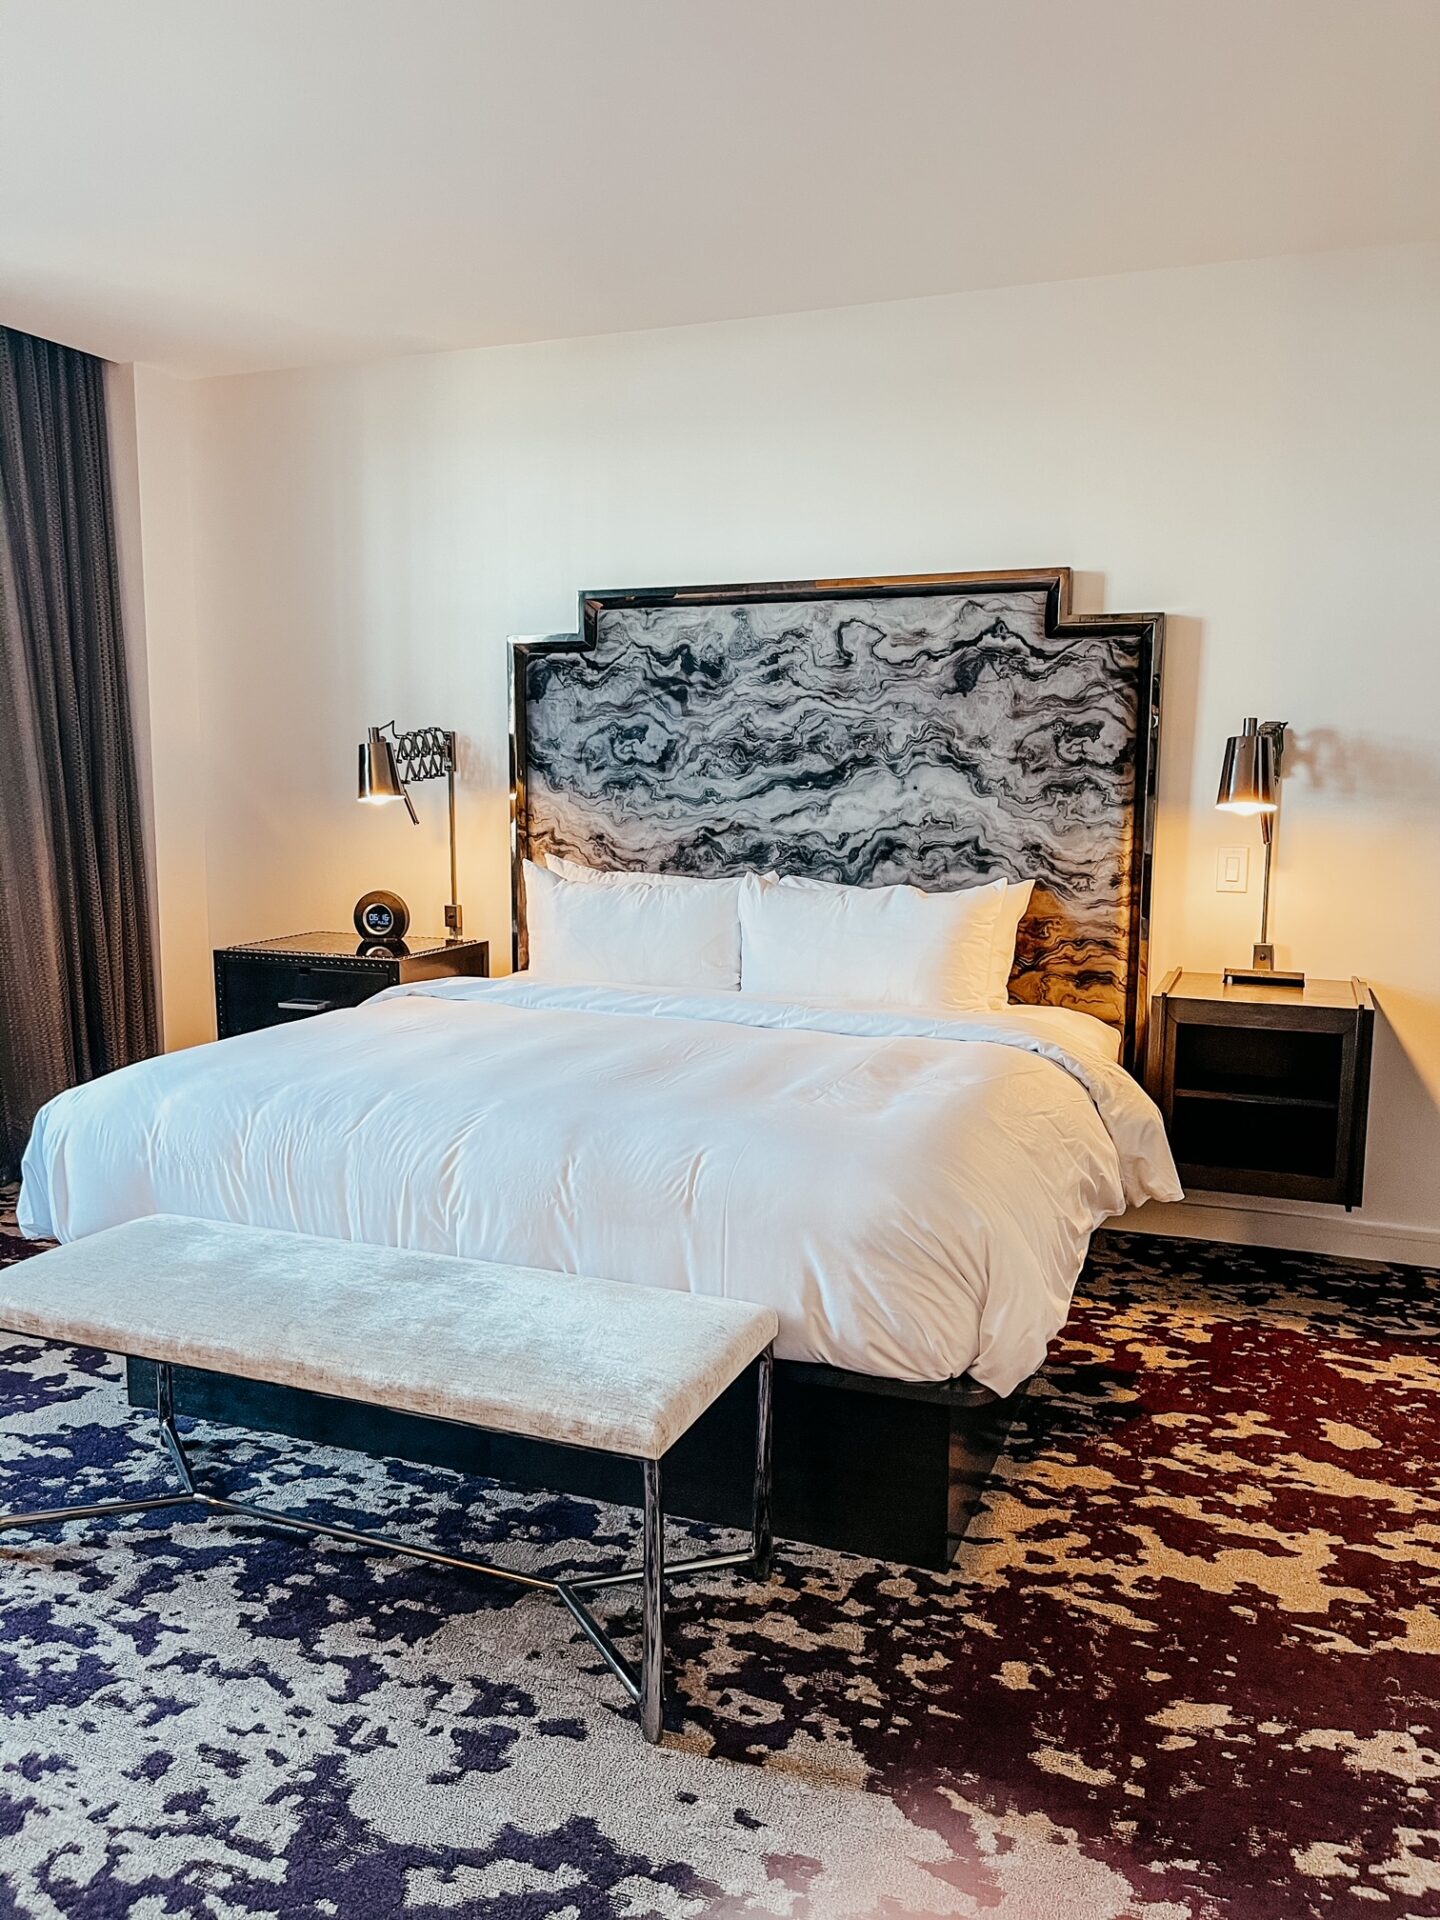 Girls Getaway by popular Nashville travel blog, Hello Happiness: image of a king size bed with white bedding and a marble headboard in a room with grey drapes and purple and white carpet. 